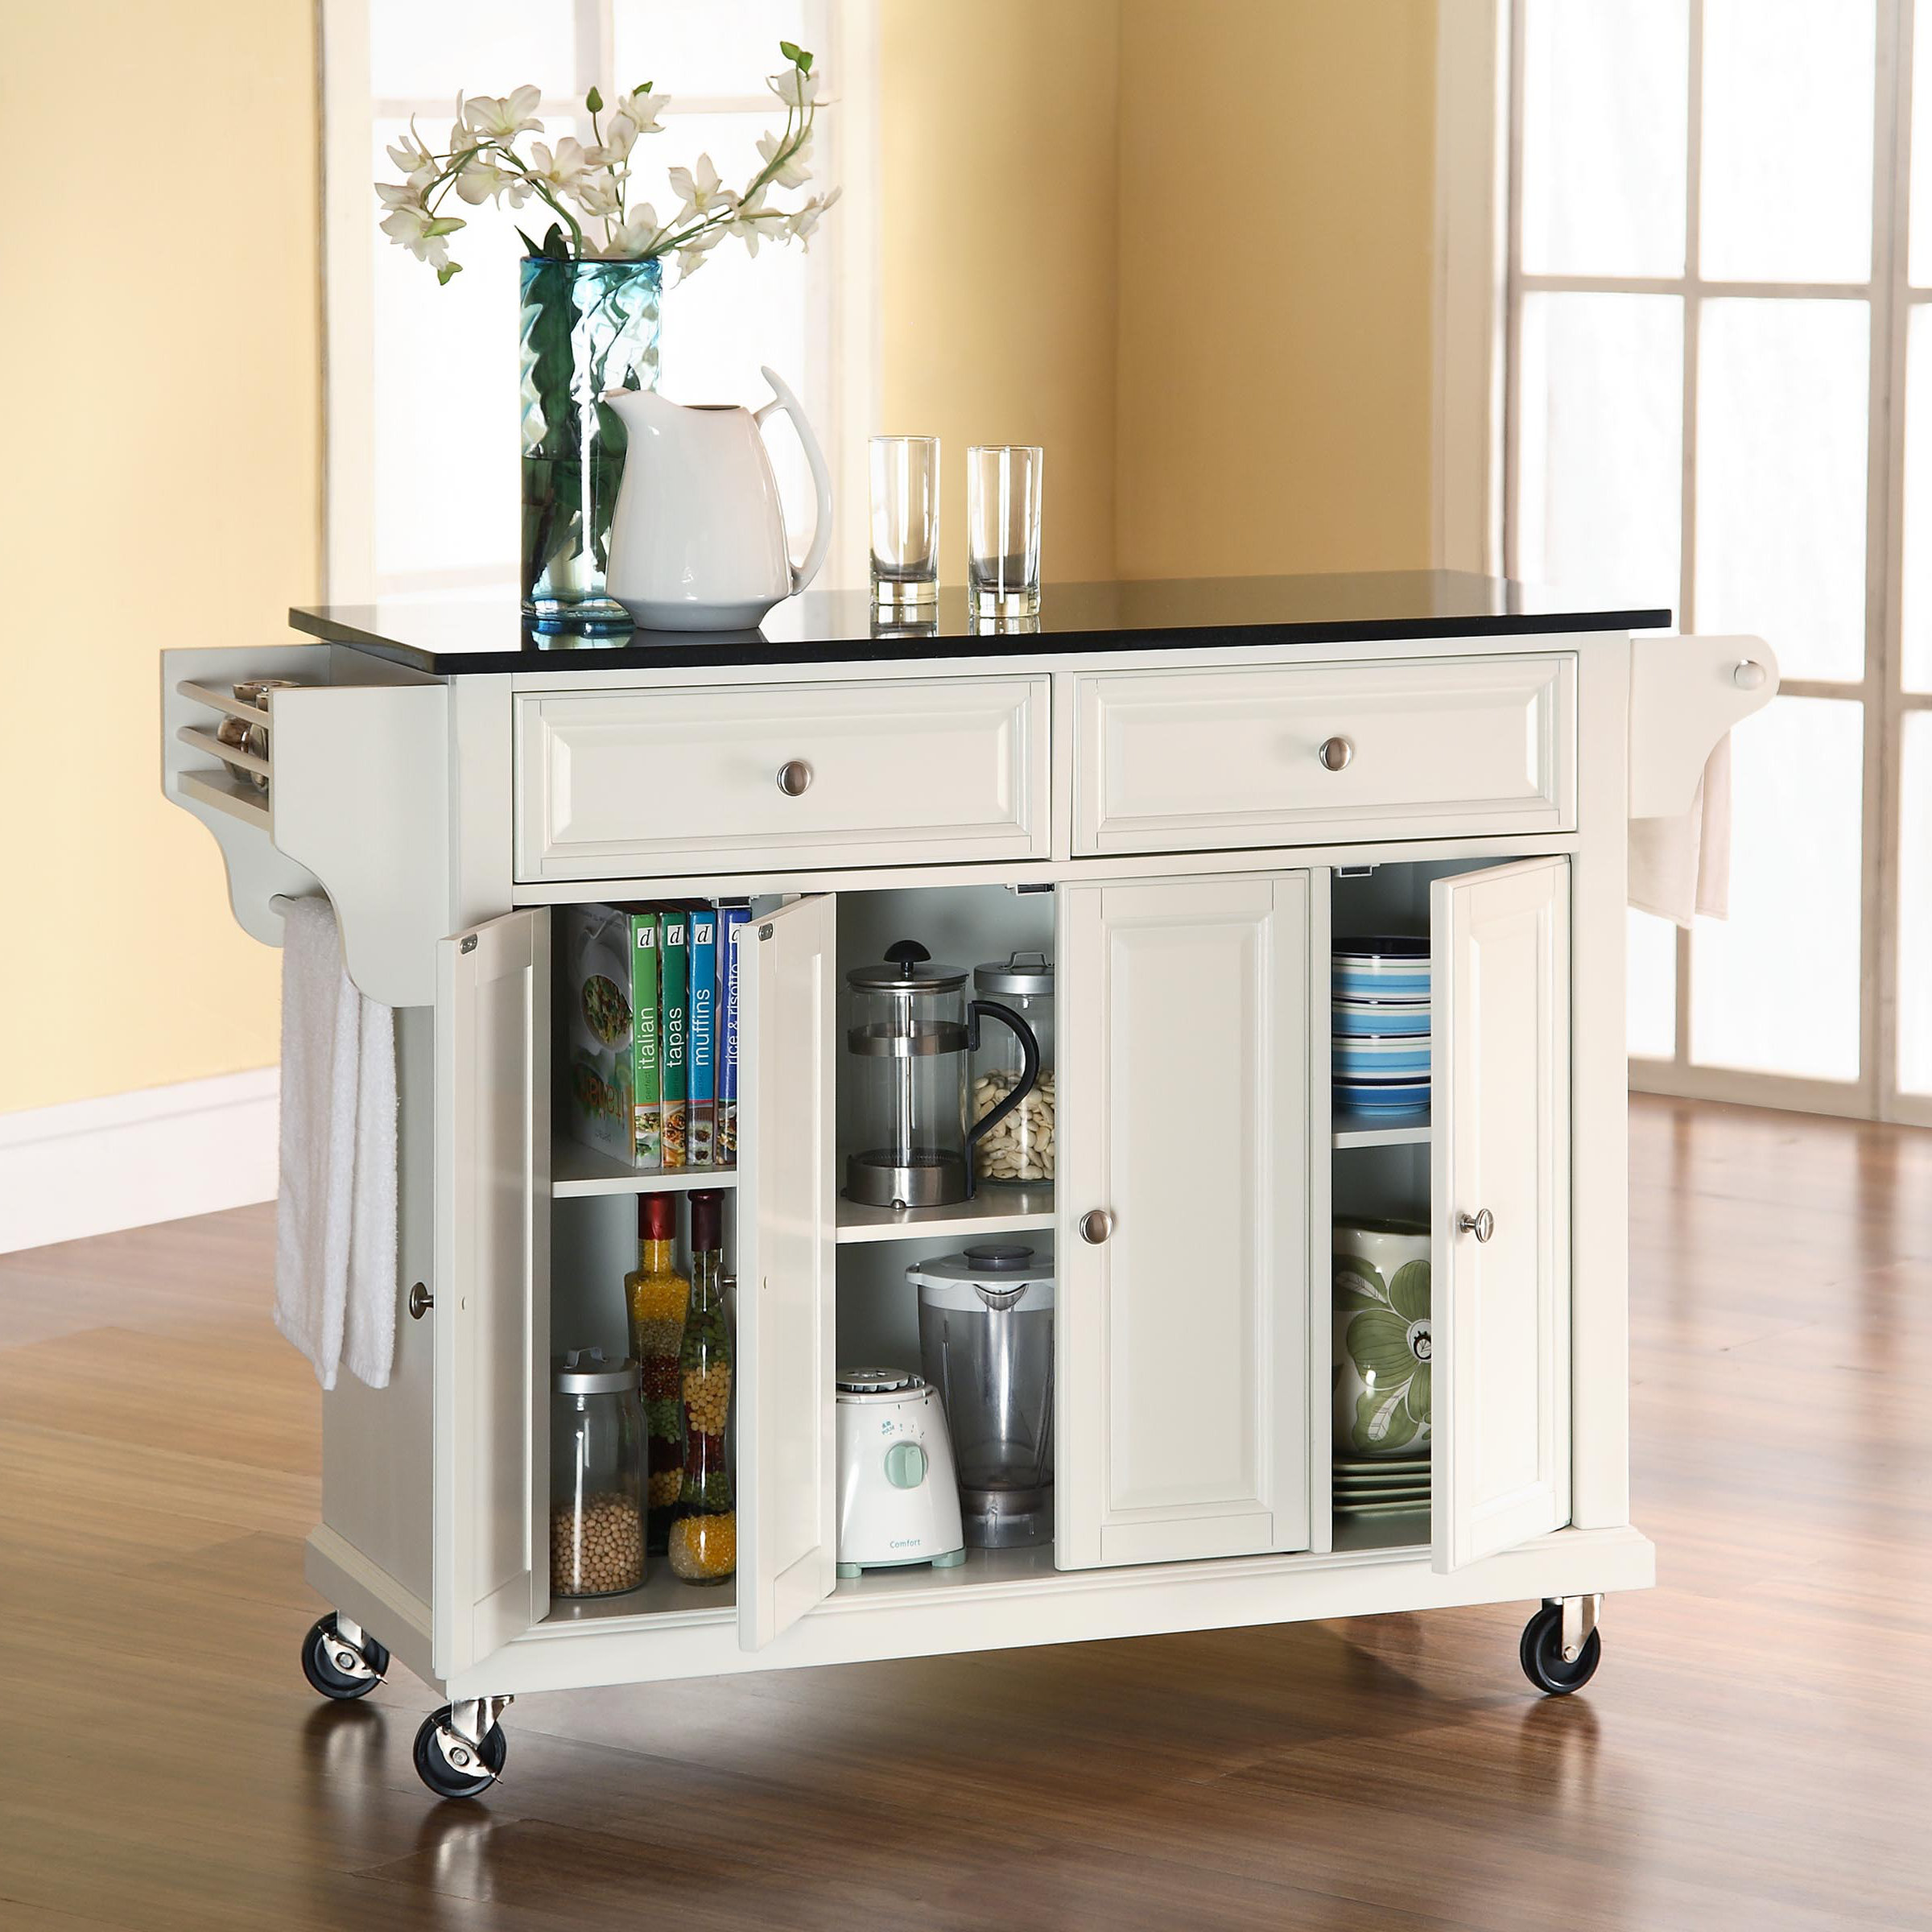 Darby Home Co Pottstown Kitchen Island with Granite Top 